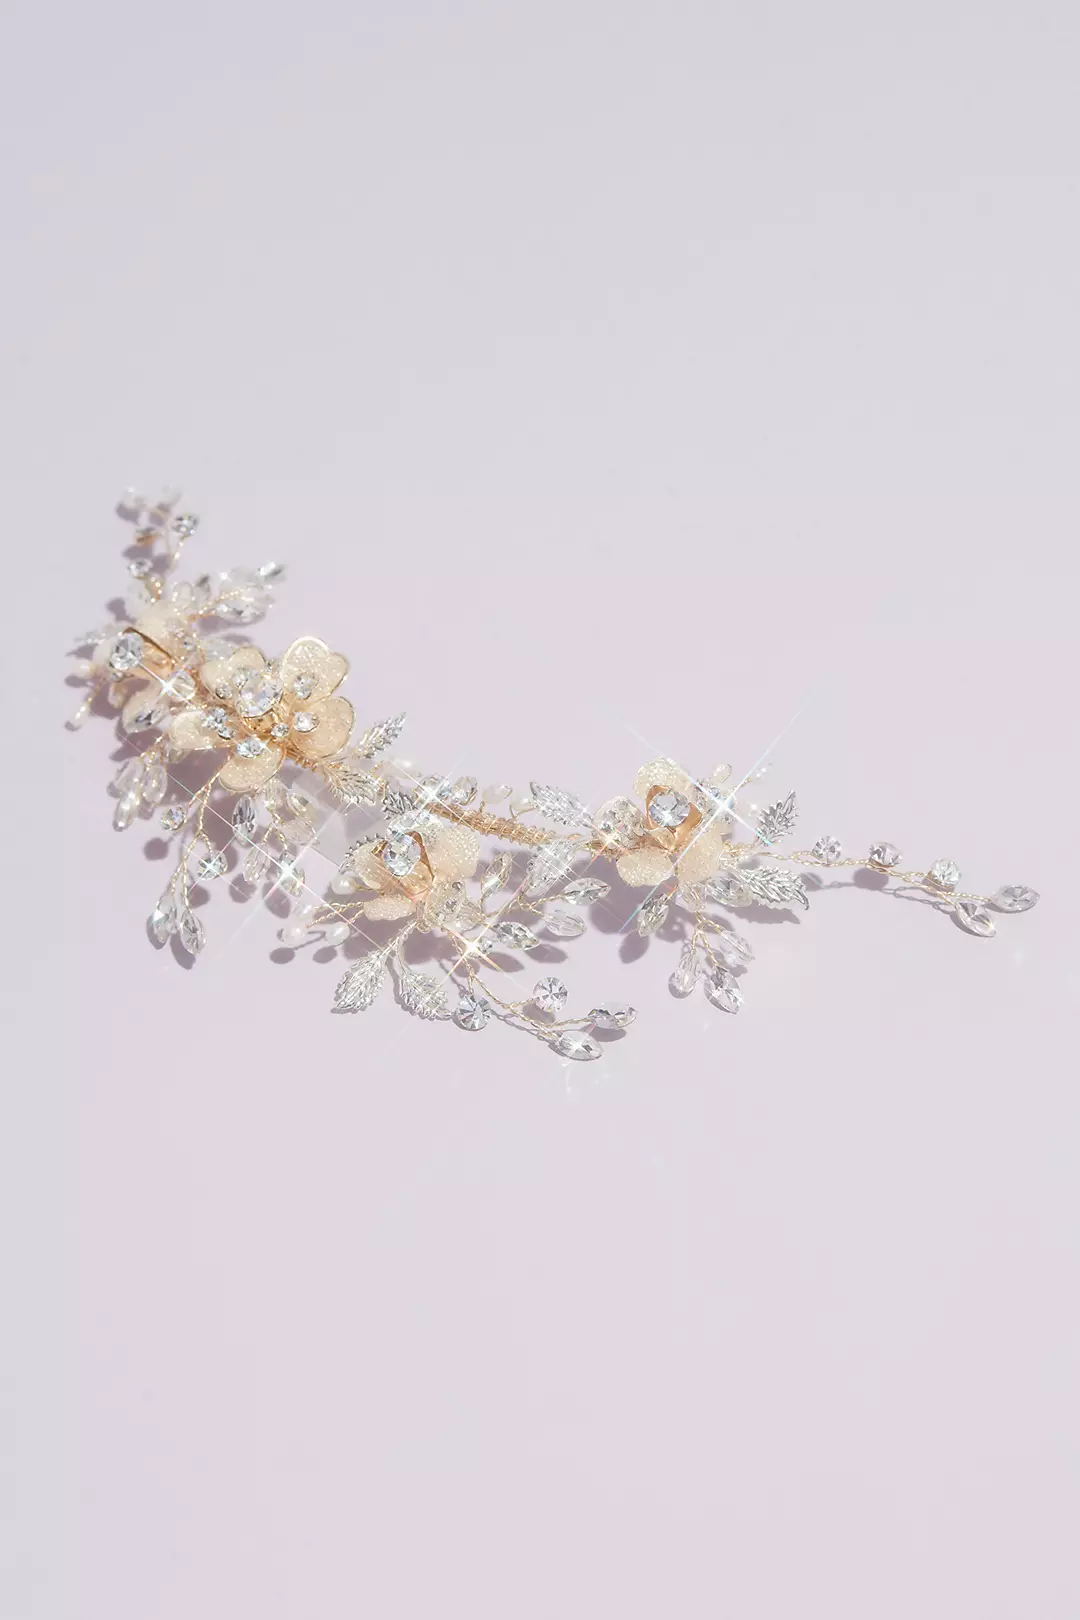 Floral Vine Headpiece with Crystals and Pearls Image